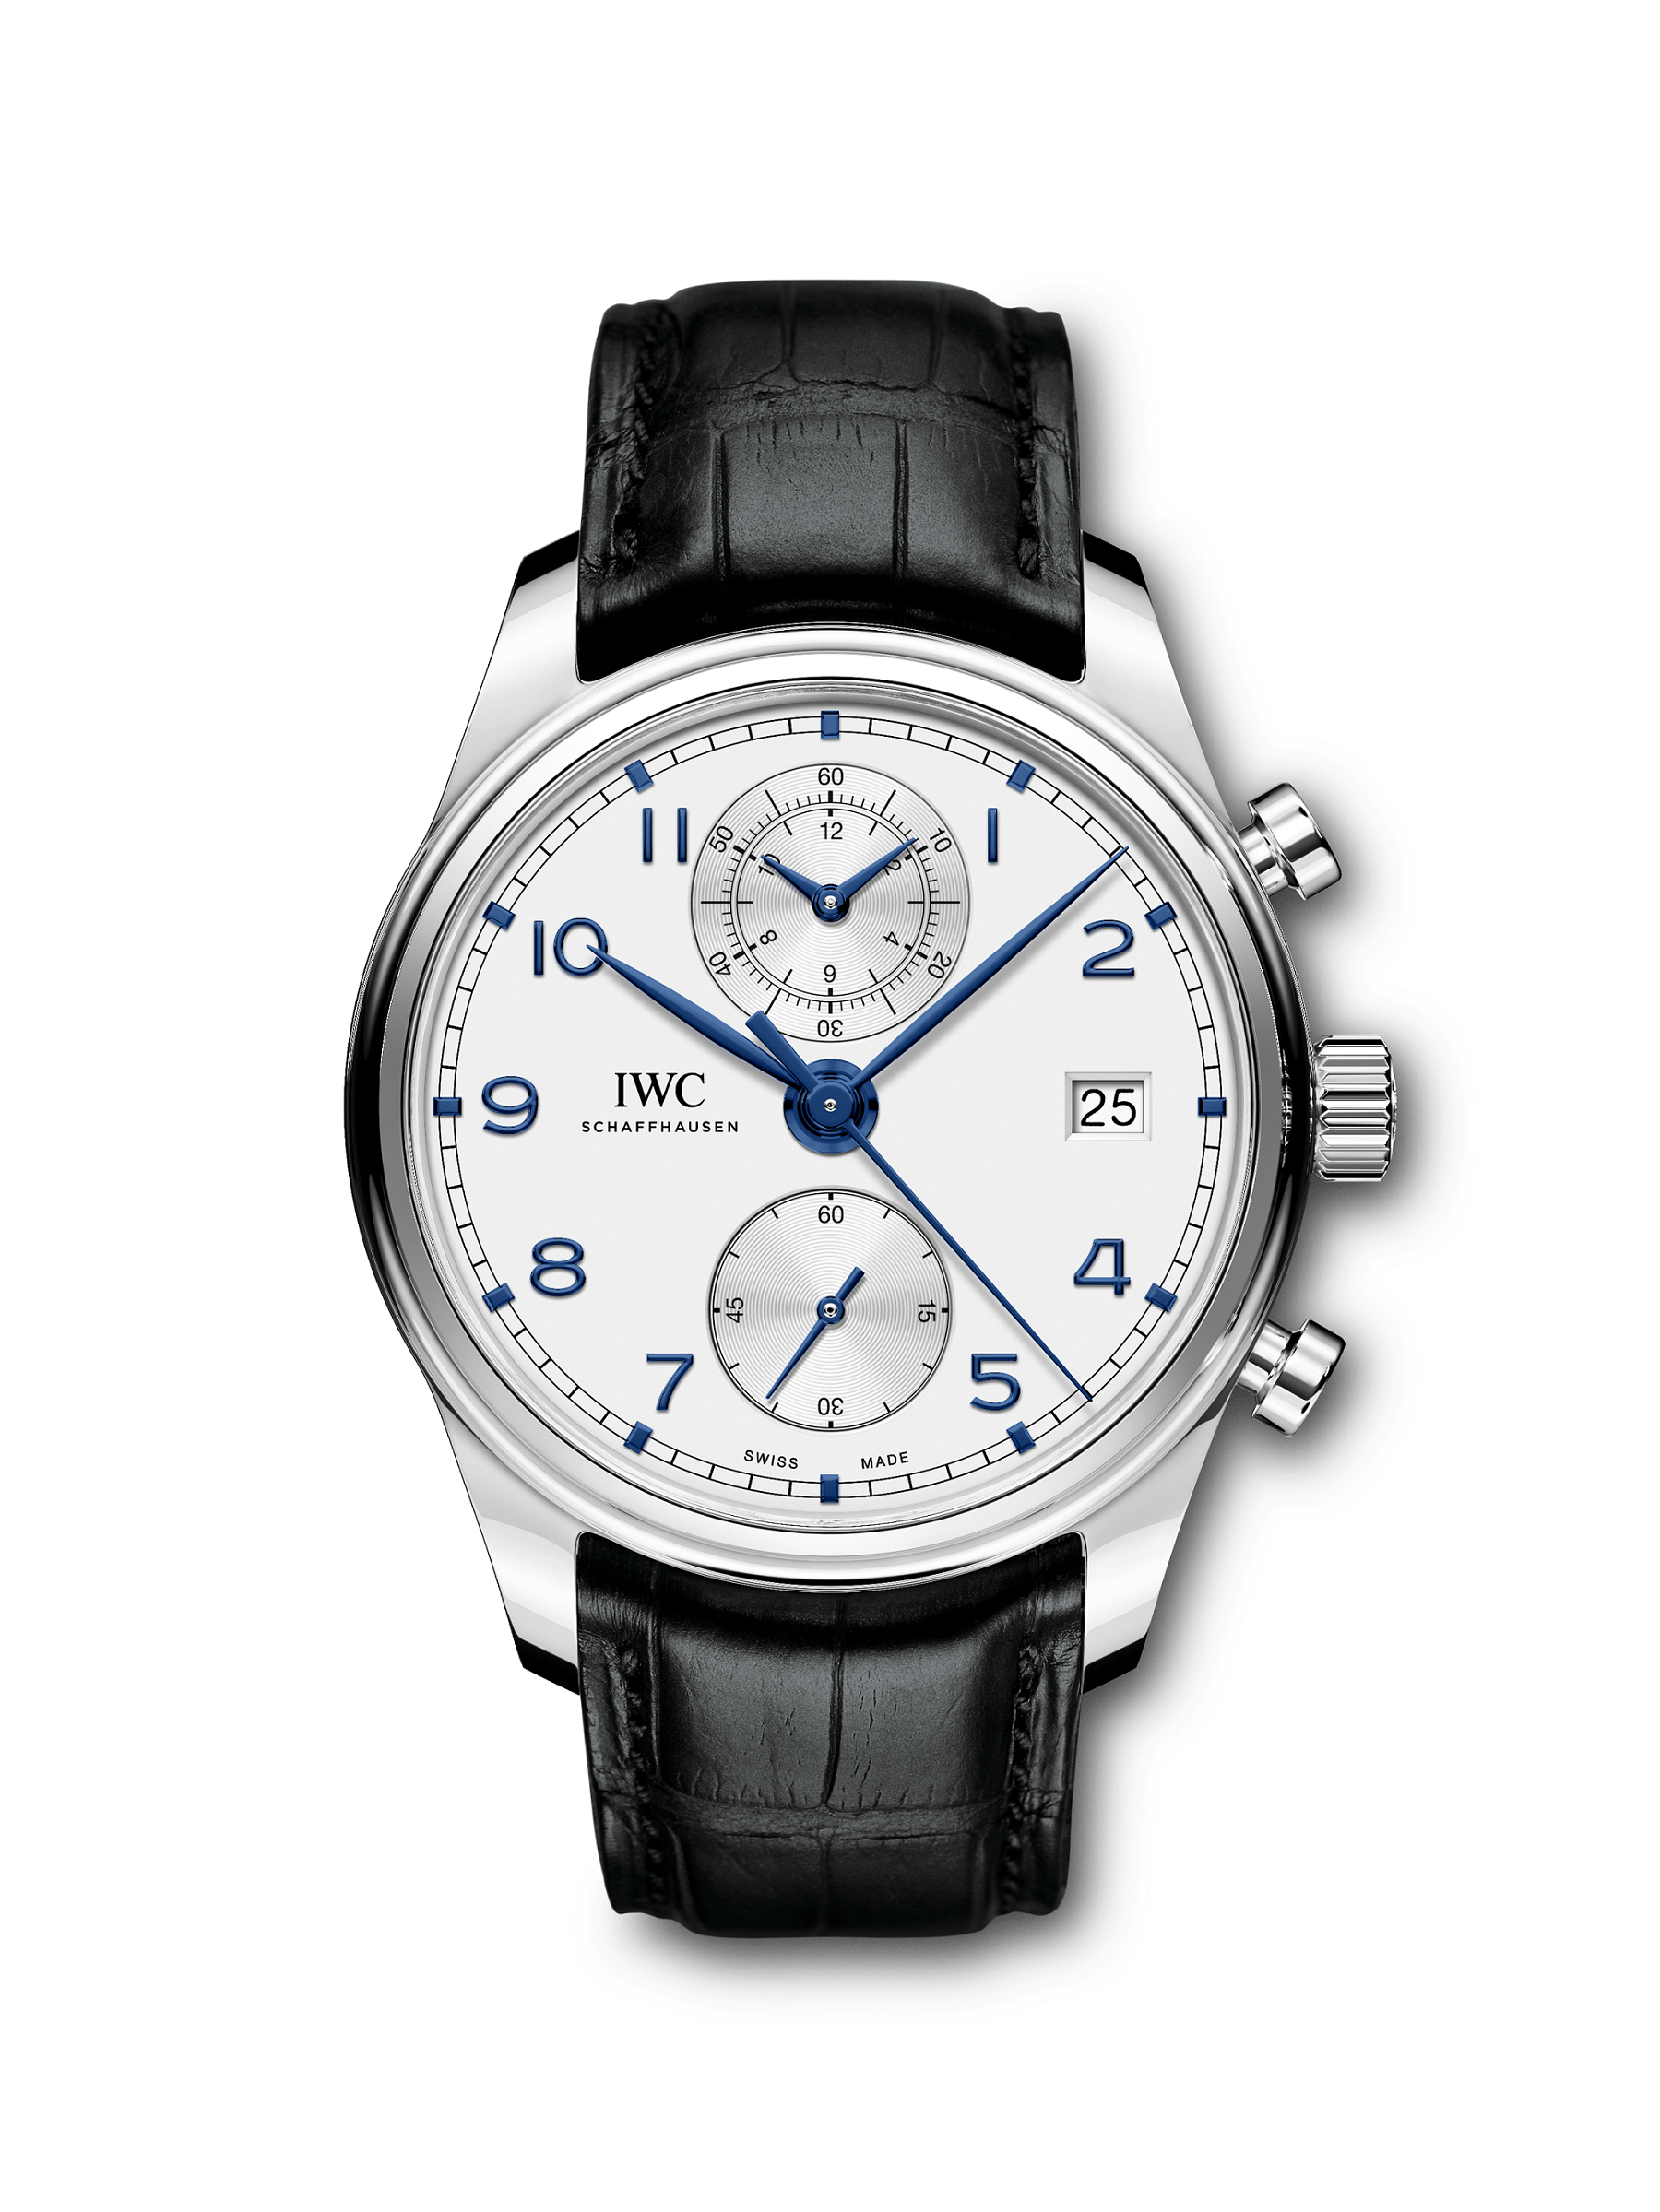 IWC Portugieser Chronograph with a classic front 